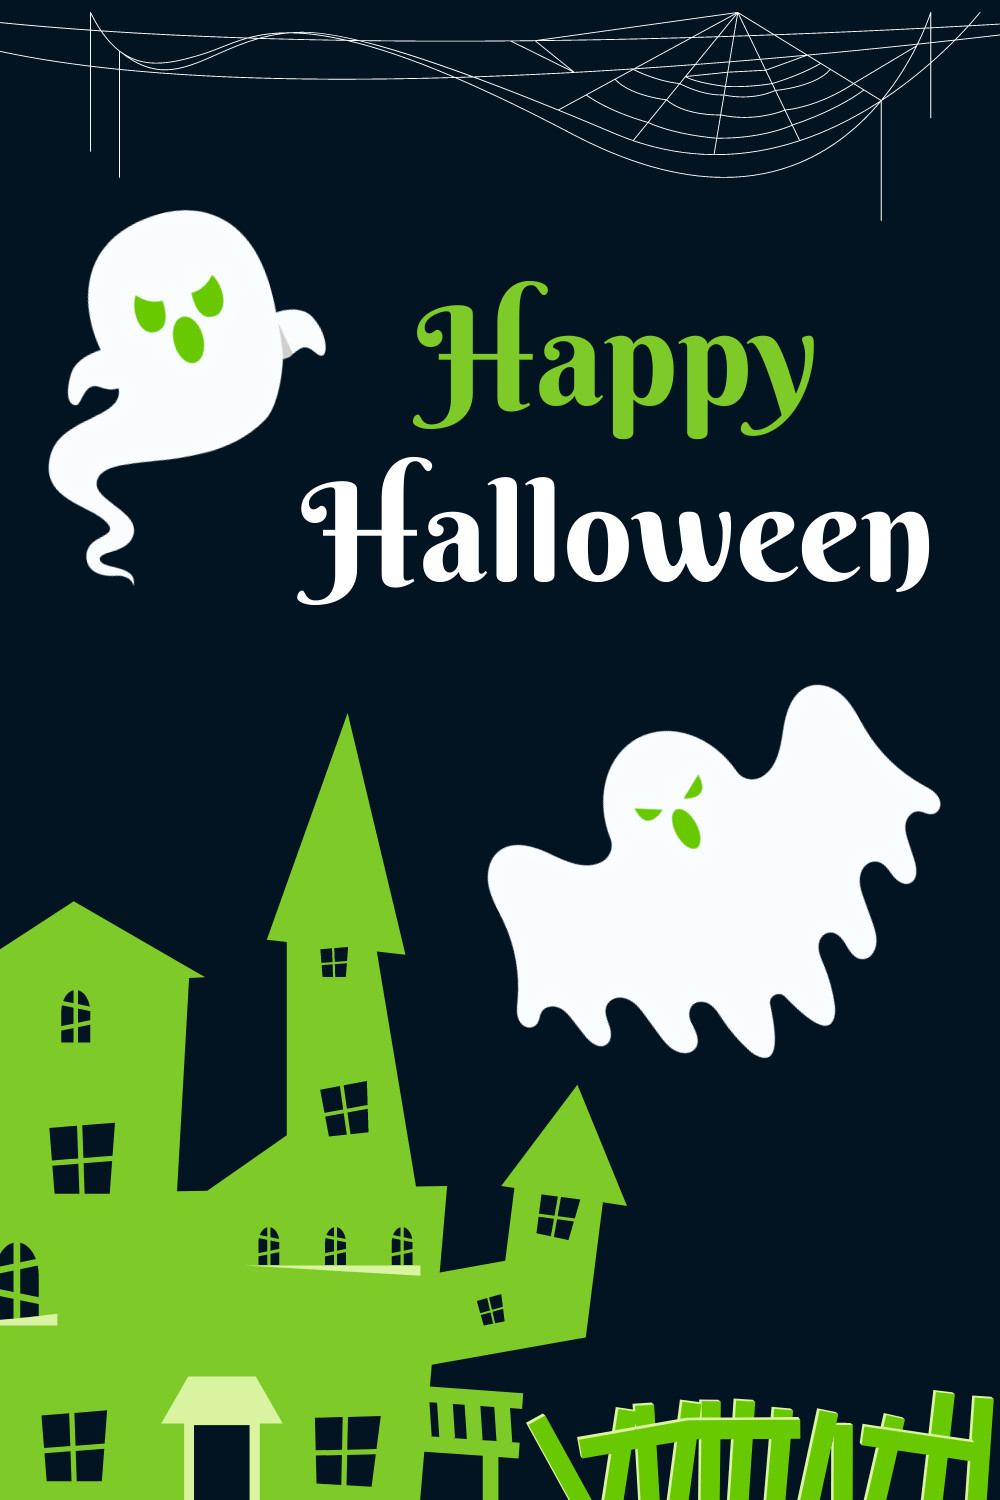 Happy Halloween with Ghosts